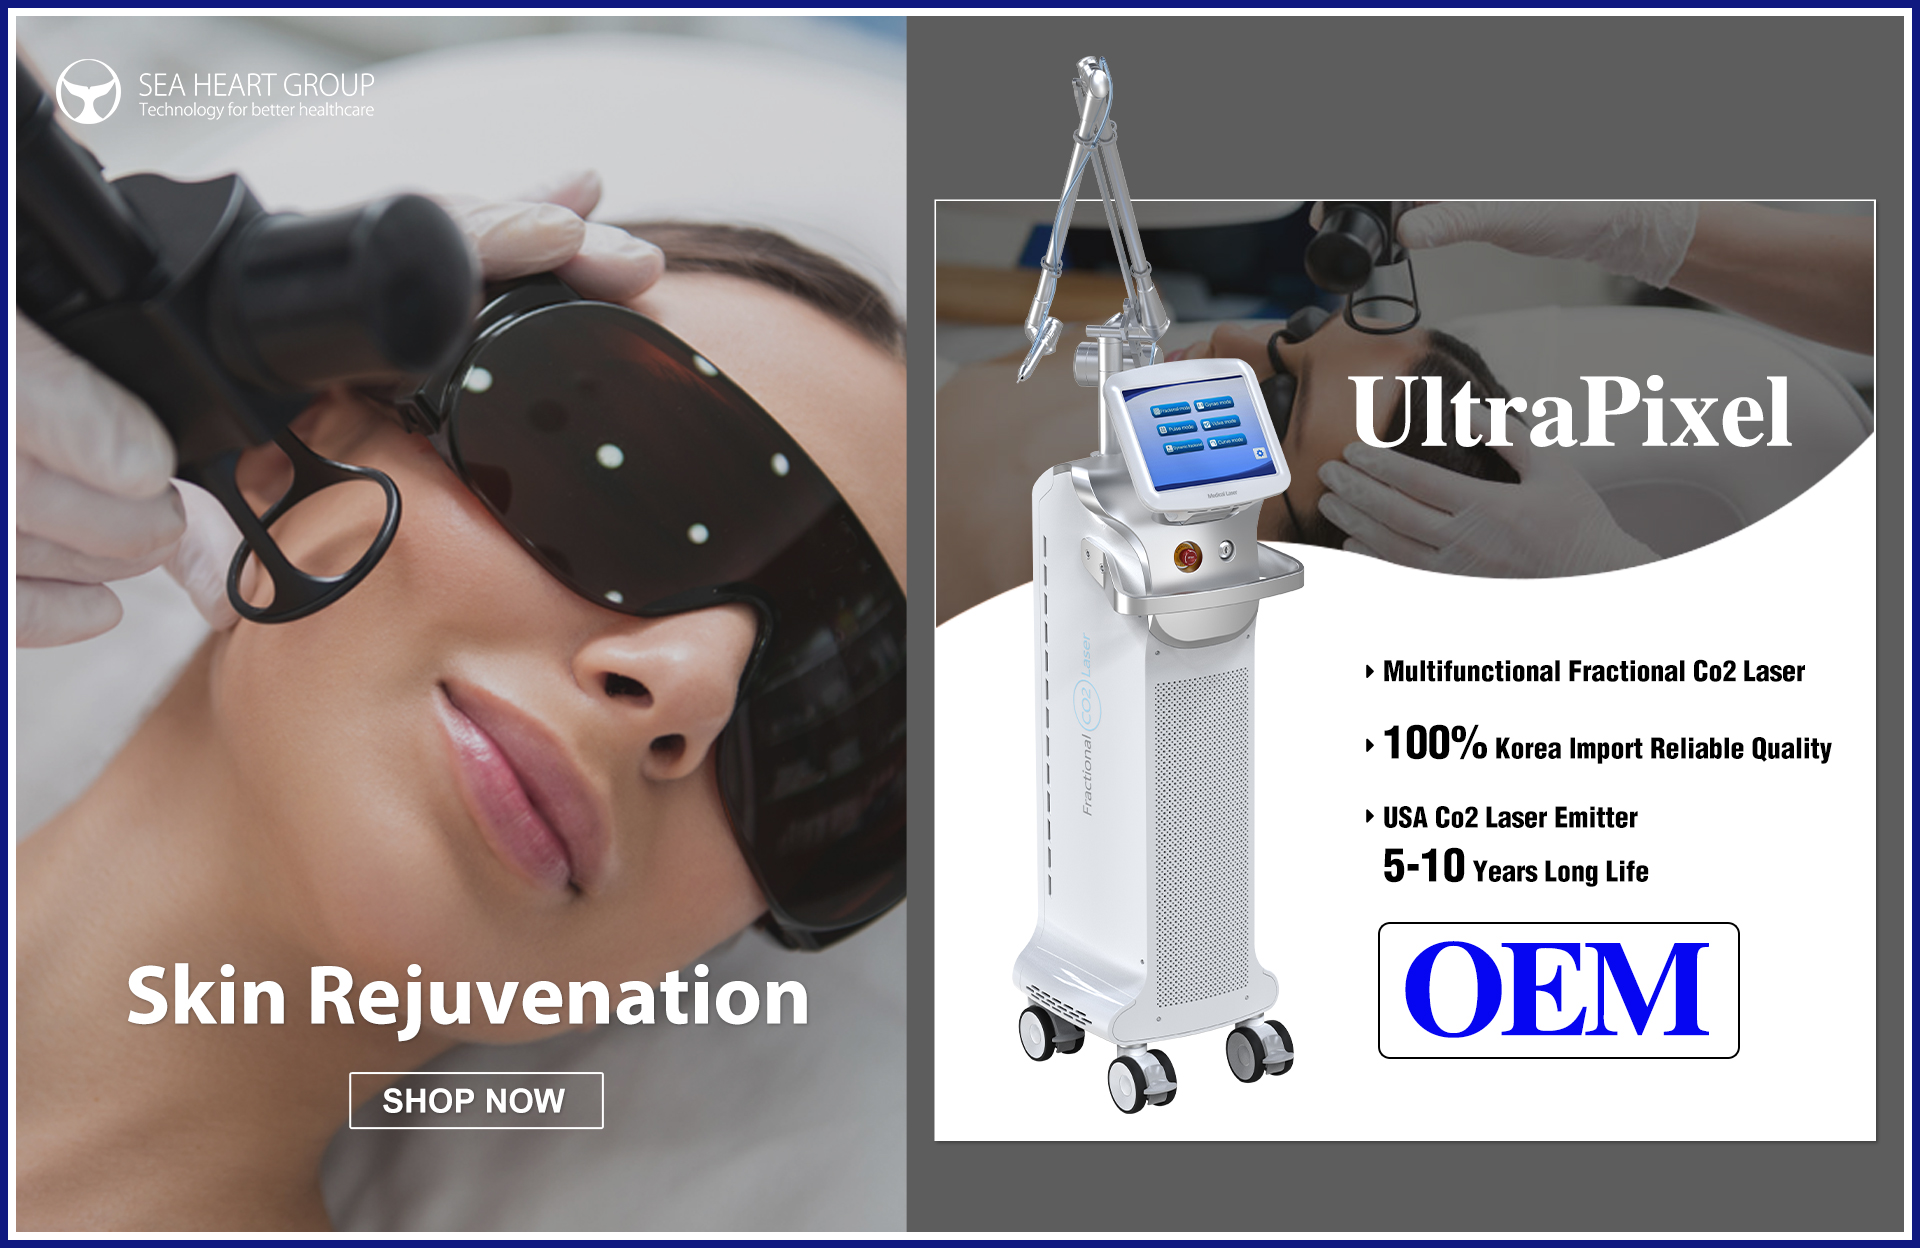 Revolutionize Your Beauty Journey with SEA HEART's CO2 Fractional Laser Machine